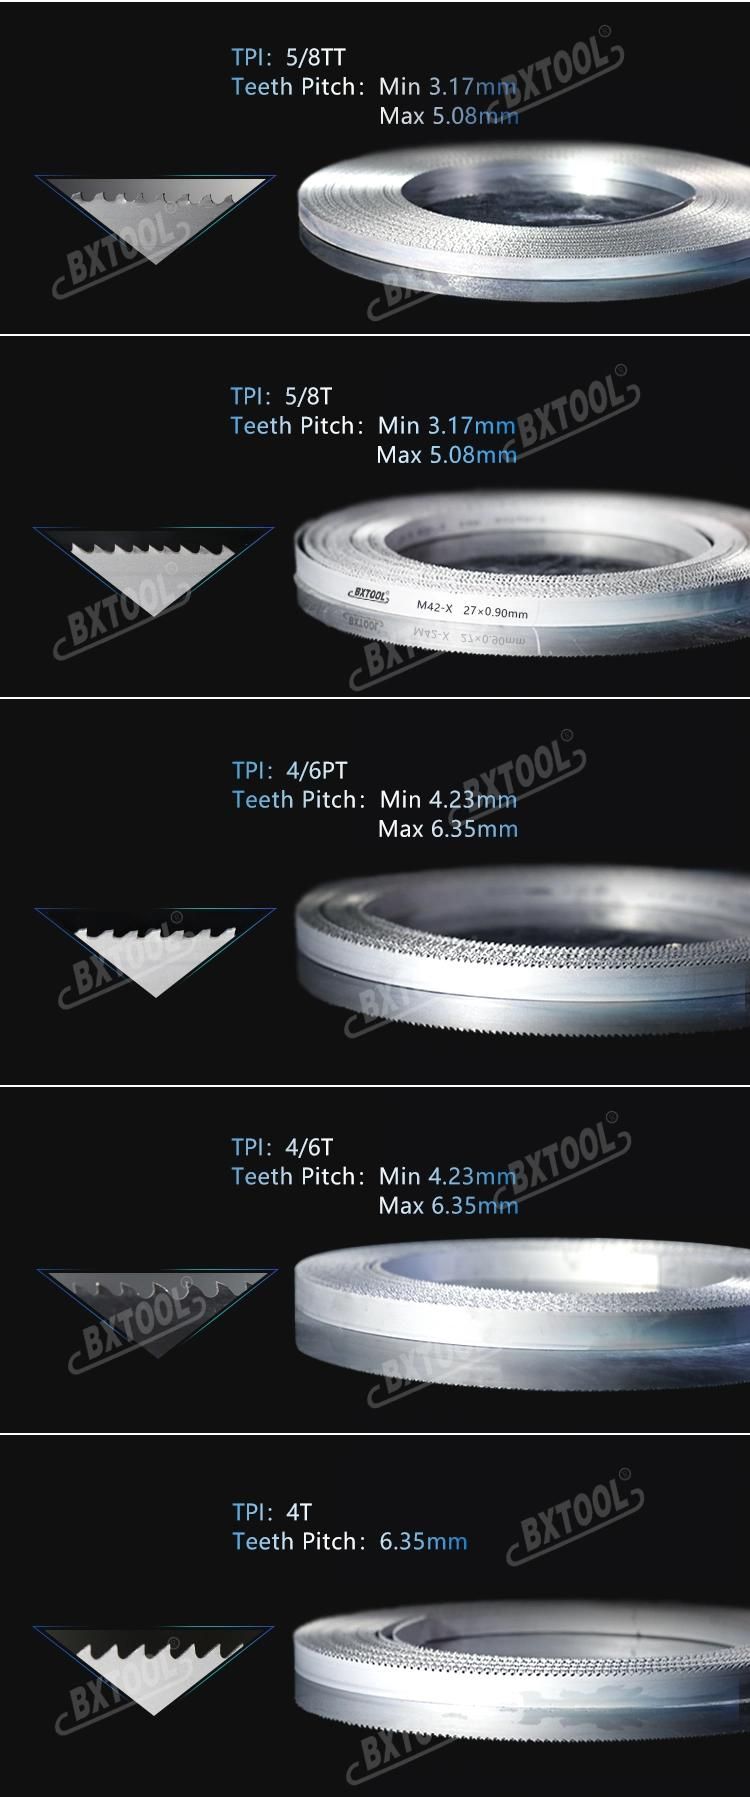 Bxtool High Quality Aluminum Saw and 27 mm Band Saw Blade for Alloy Steel